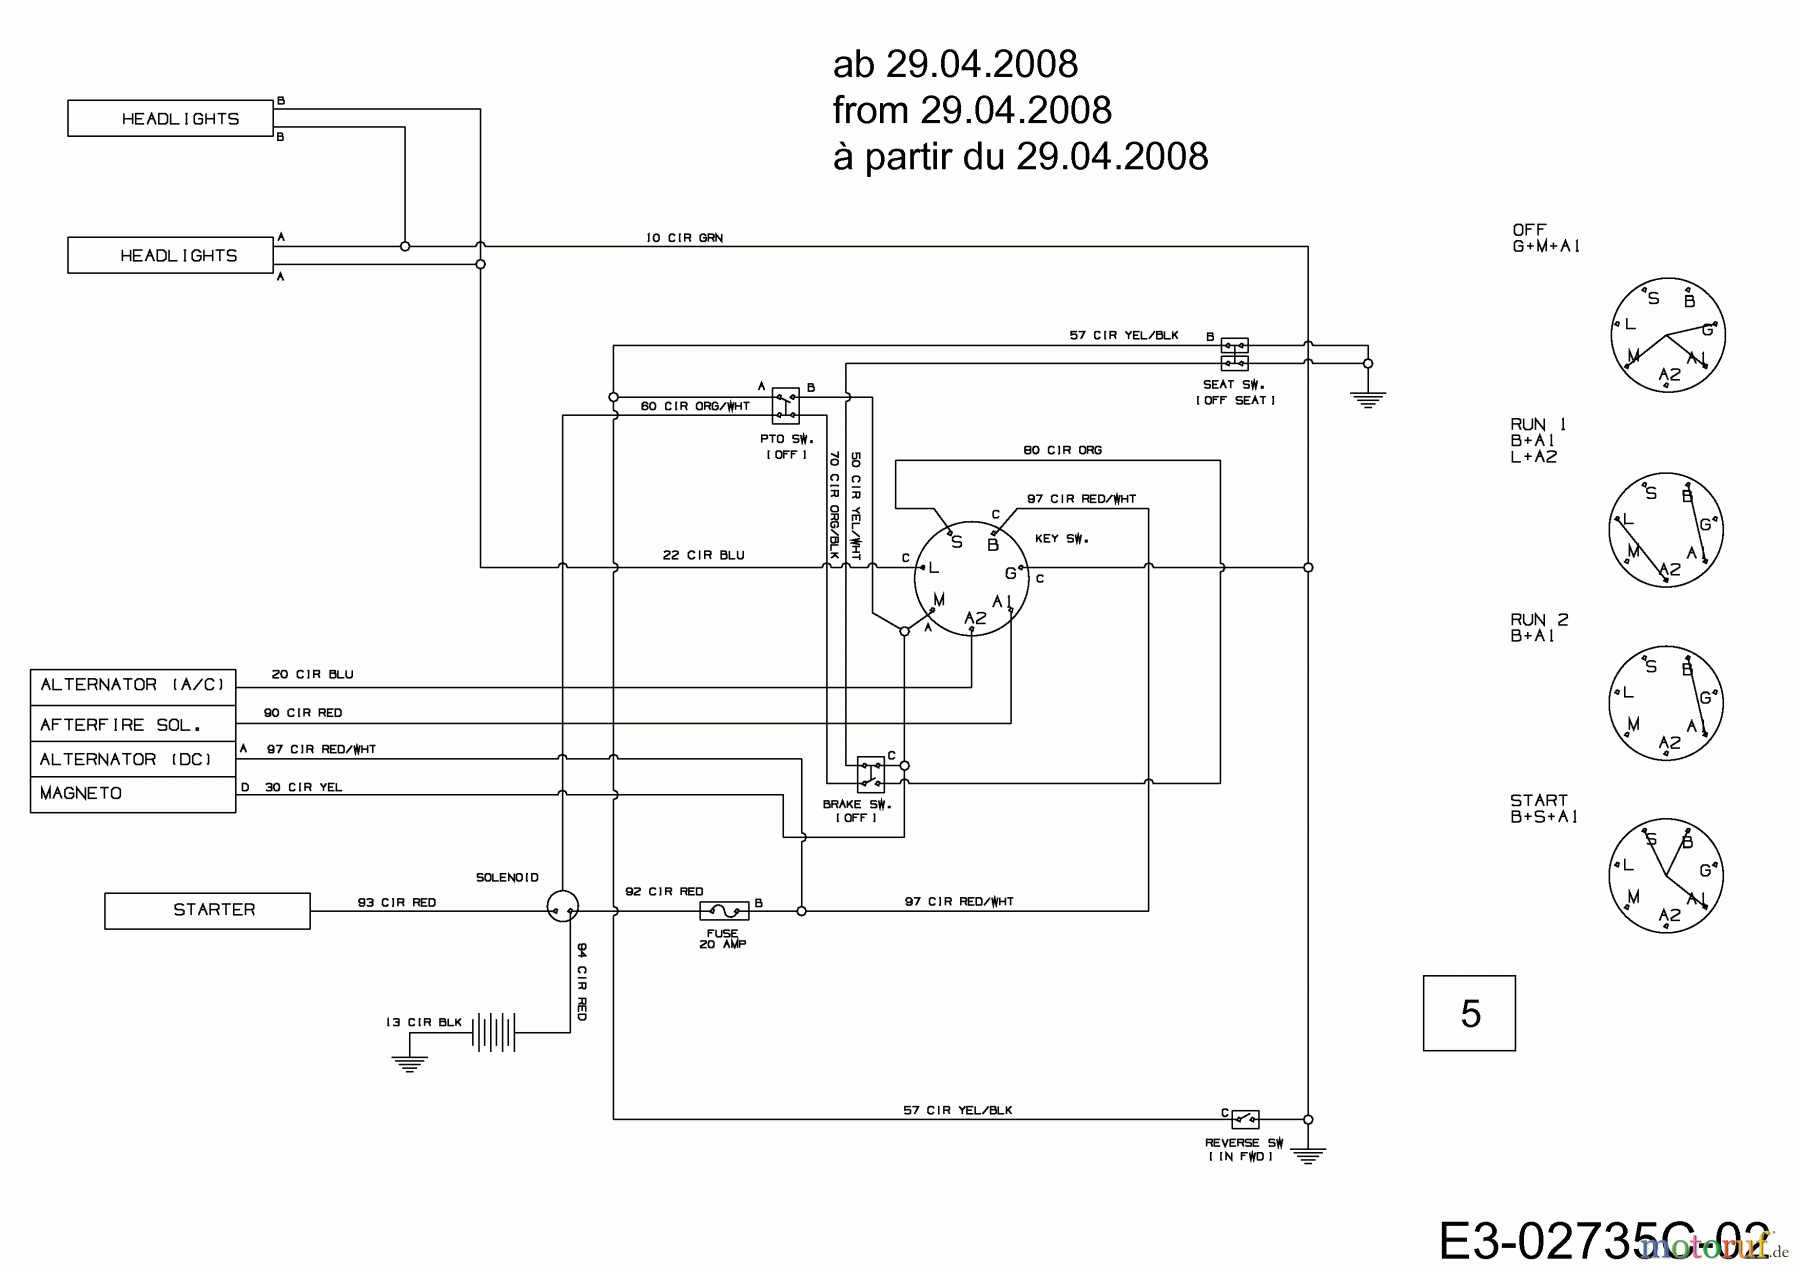  Efco Lawn tractors Formula 108/17 H 13AD799G437  (2008) Wiring diagram from 29.04.2008